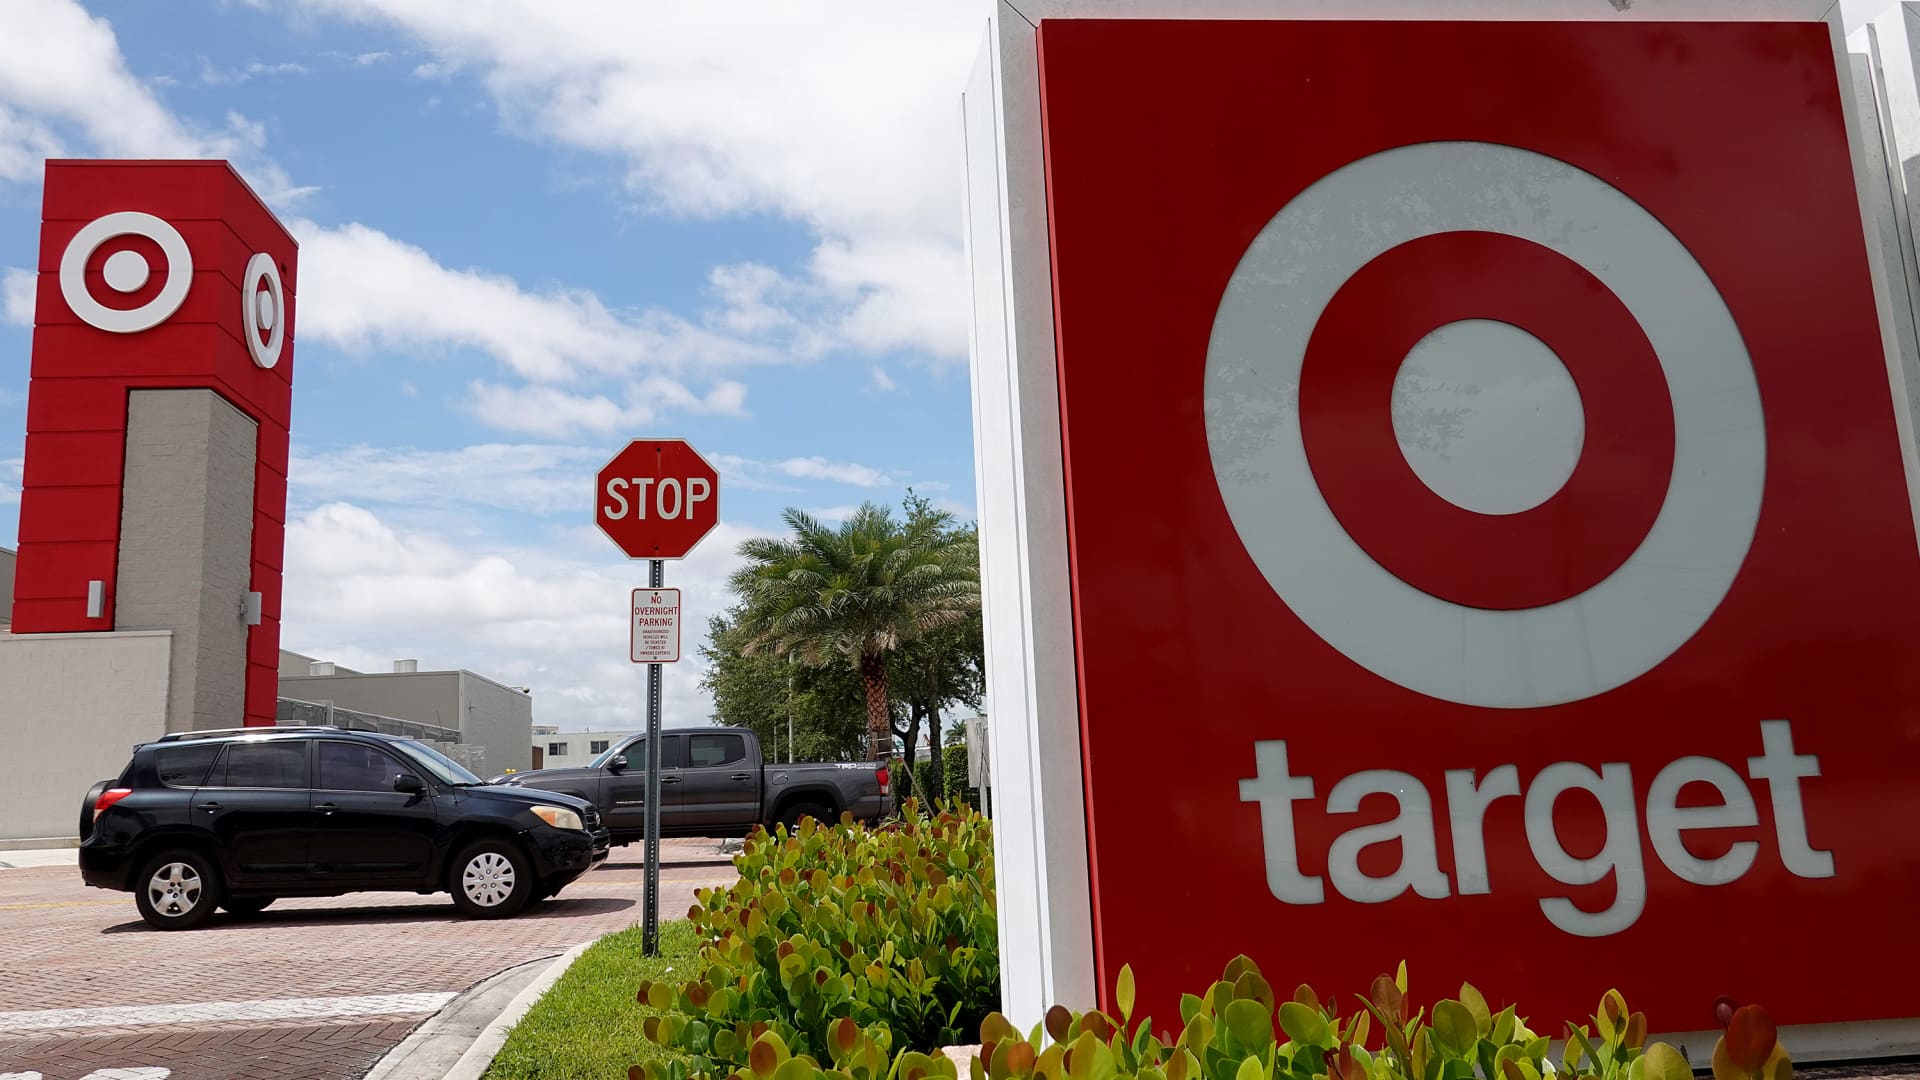 Target (TGT) Q2 2022 earnings: Profit falls nearly 90%